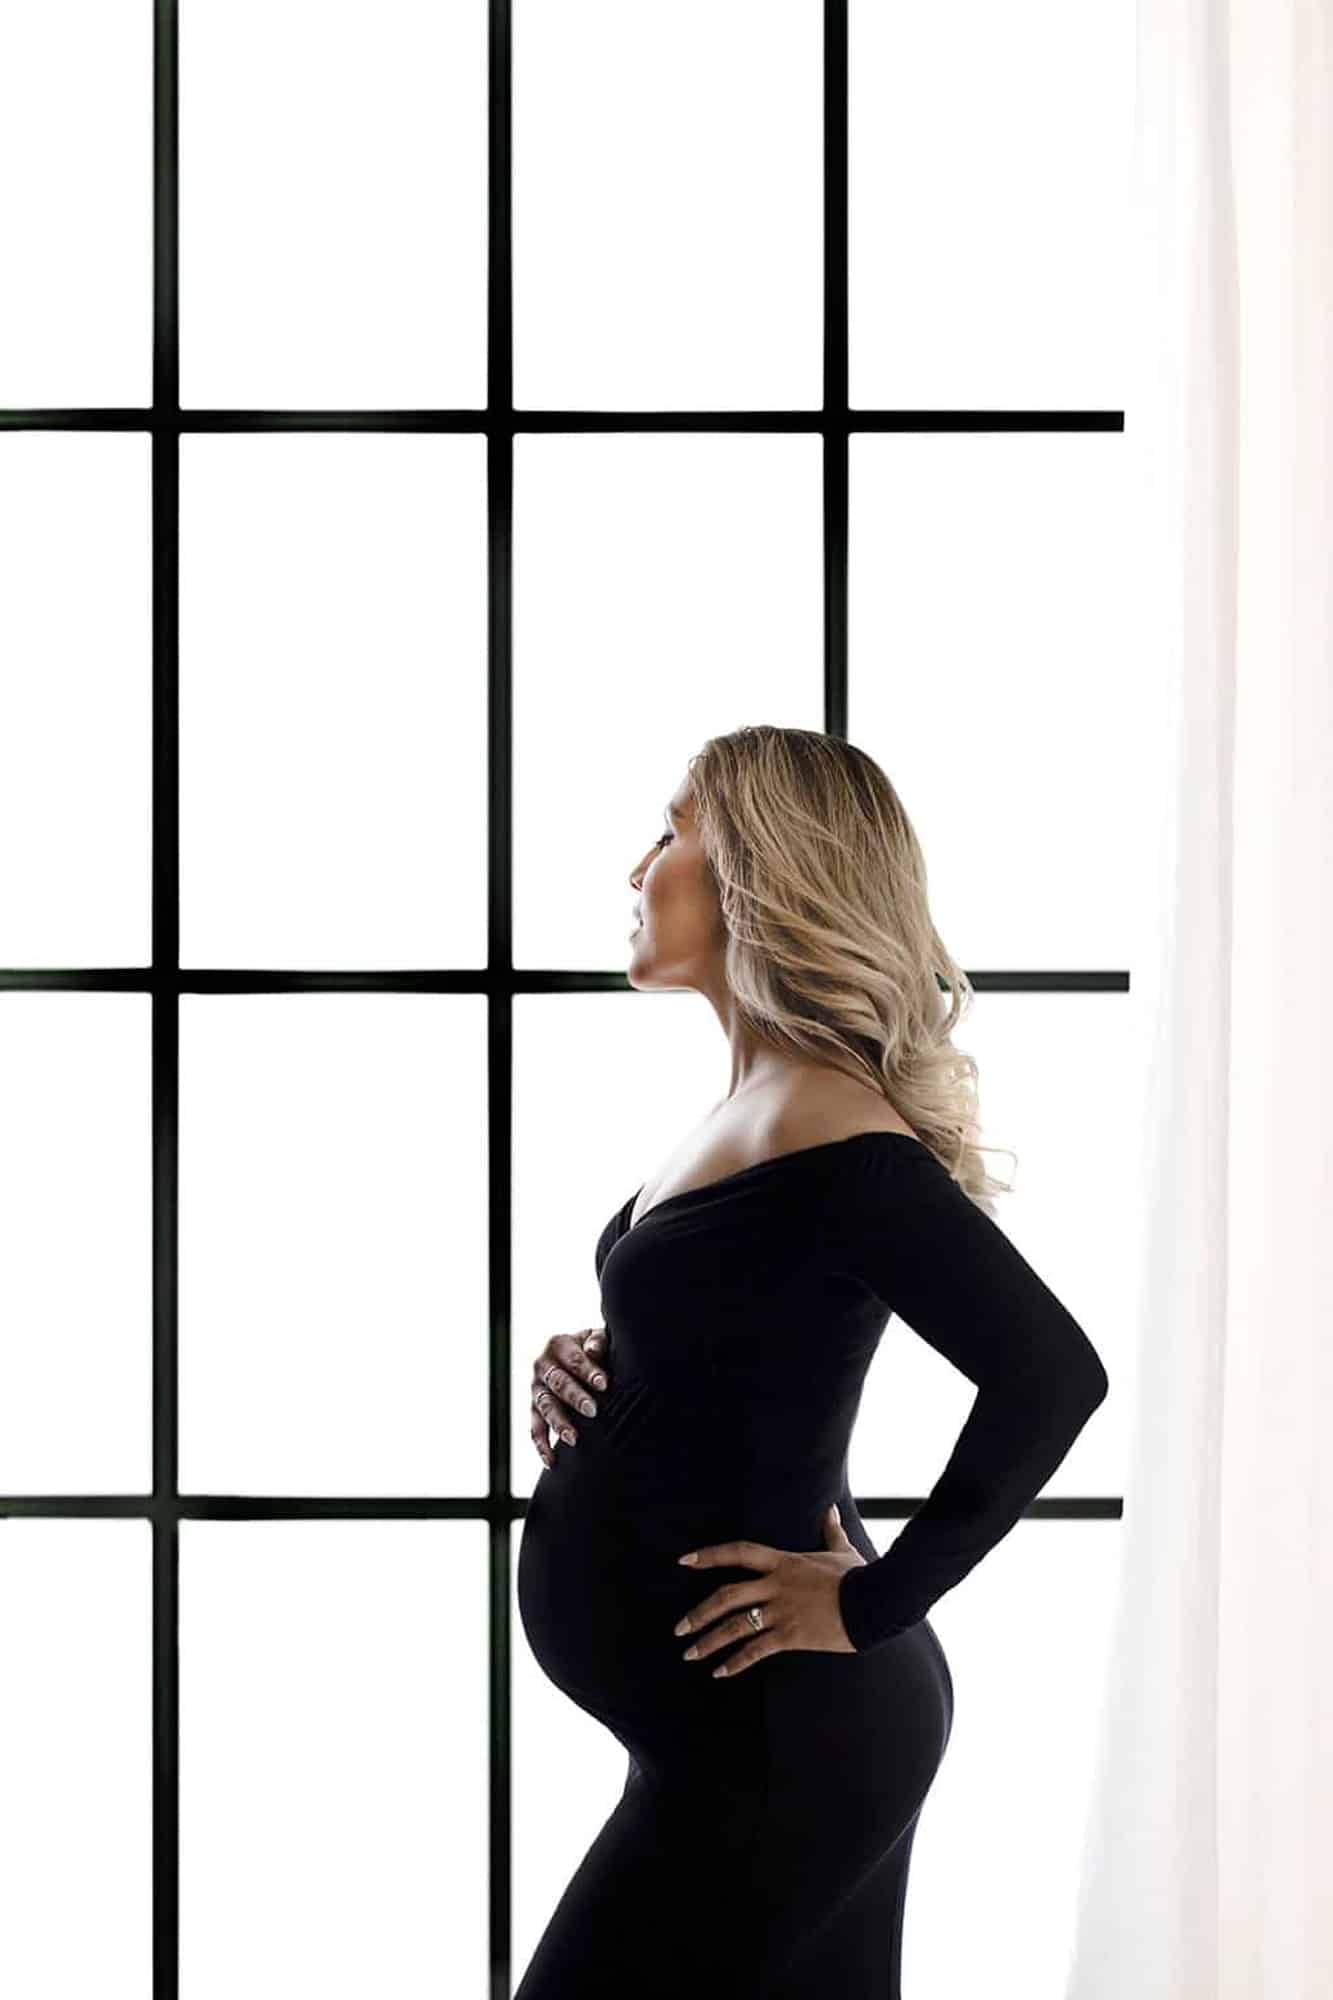 A pregnant woman in a black dress in front of a window.